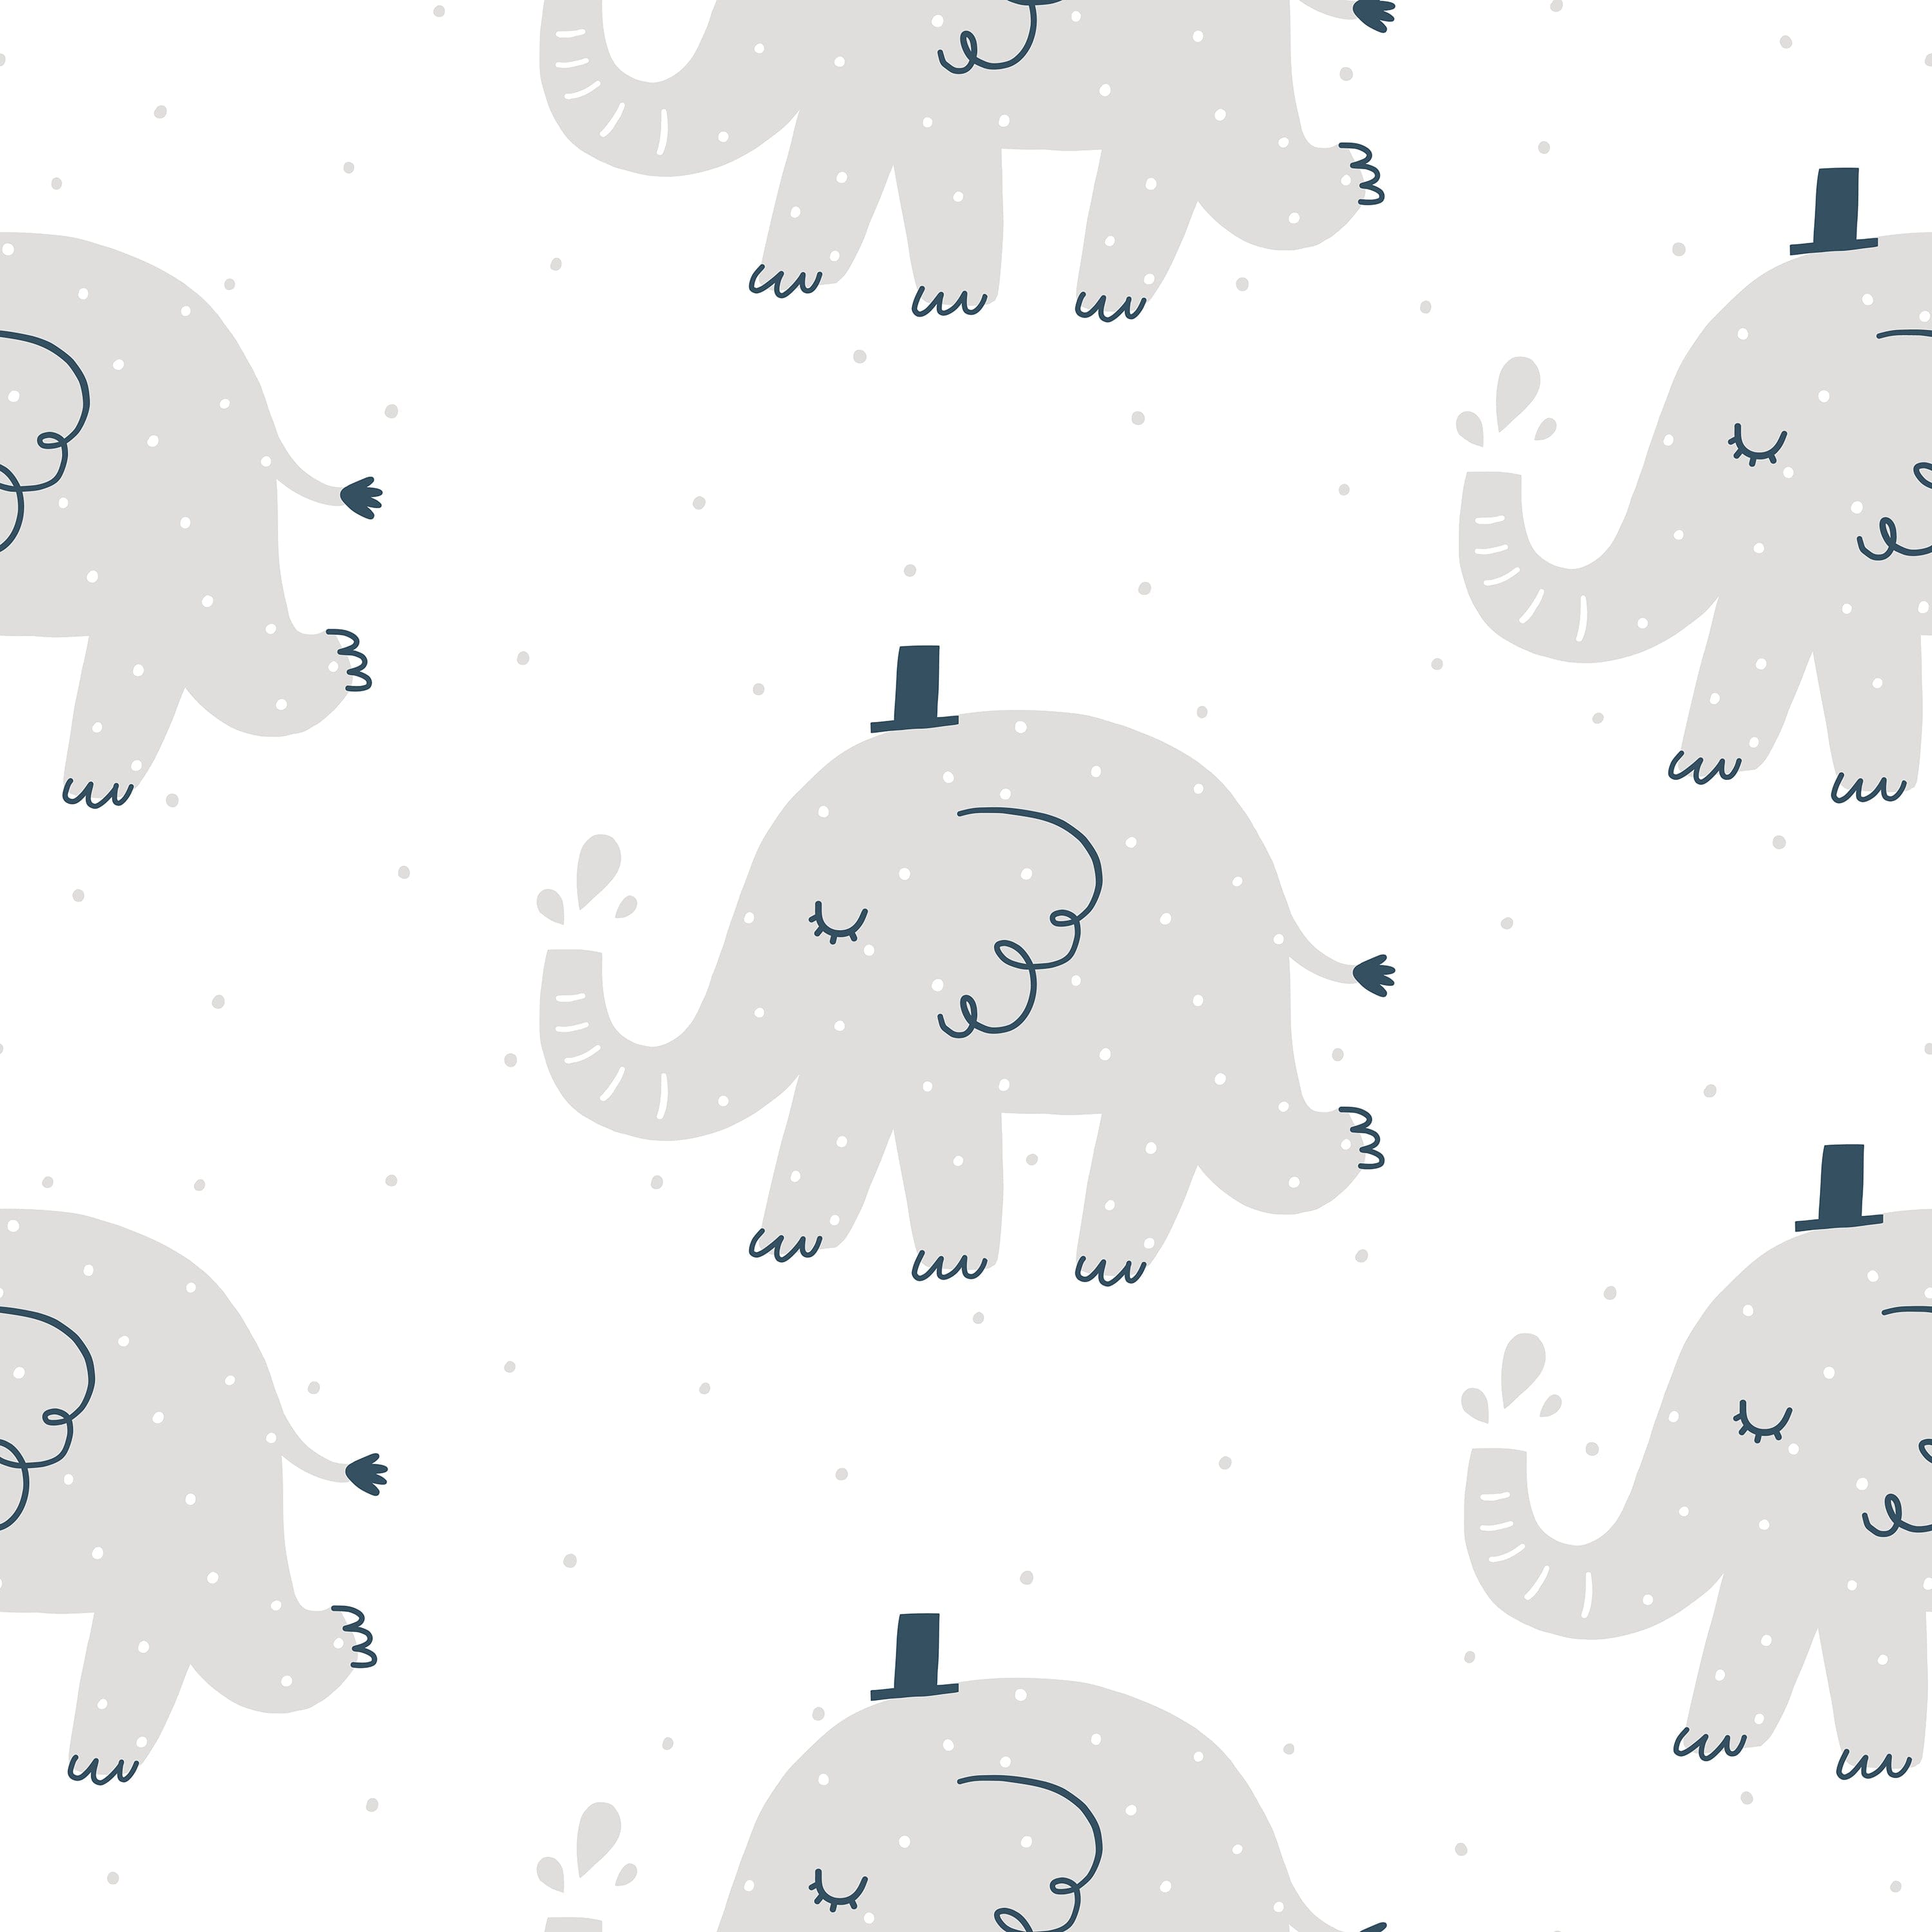 Close-up view of the Elephant Party Wallpaper featuring playful gray elephants with subtle blue accents, sprinkled with tiny dots over a white background, ideal for children's rooms or nurseries.